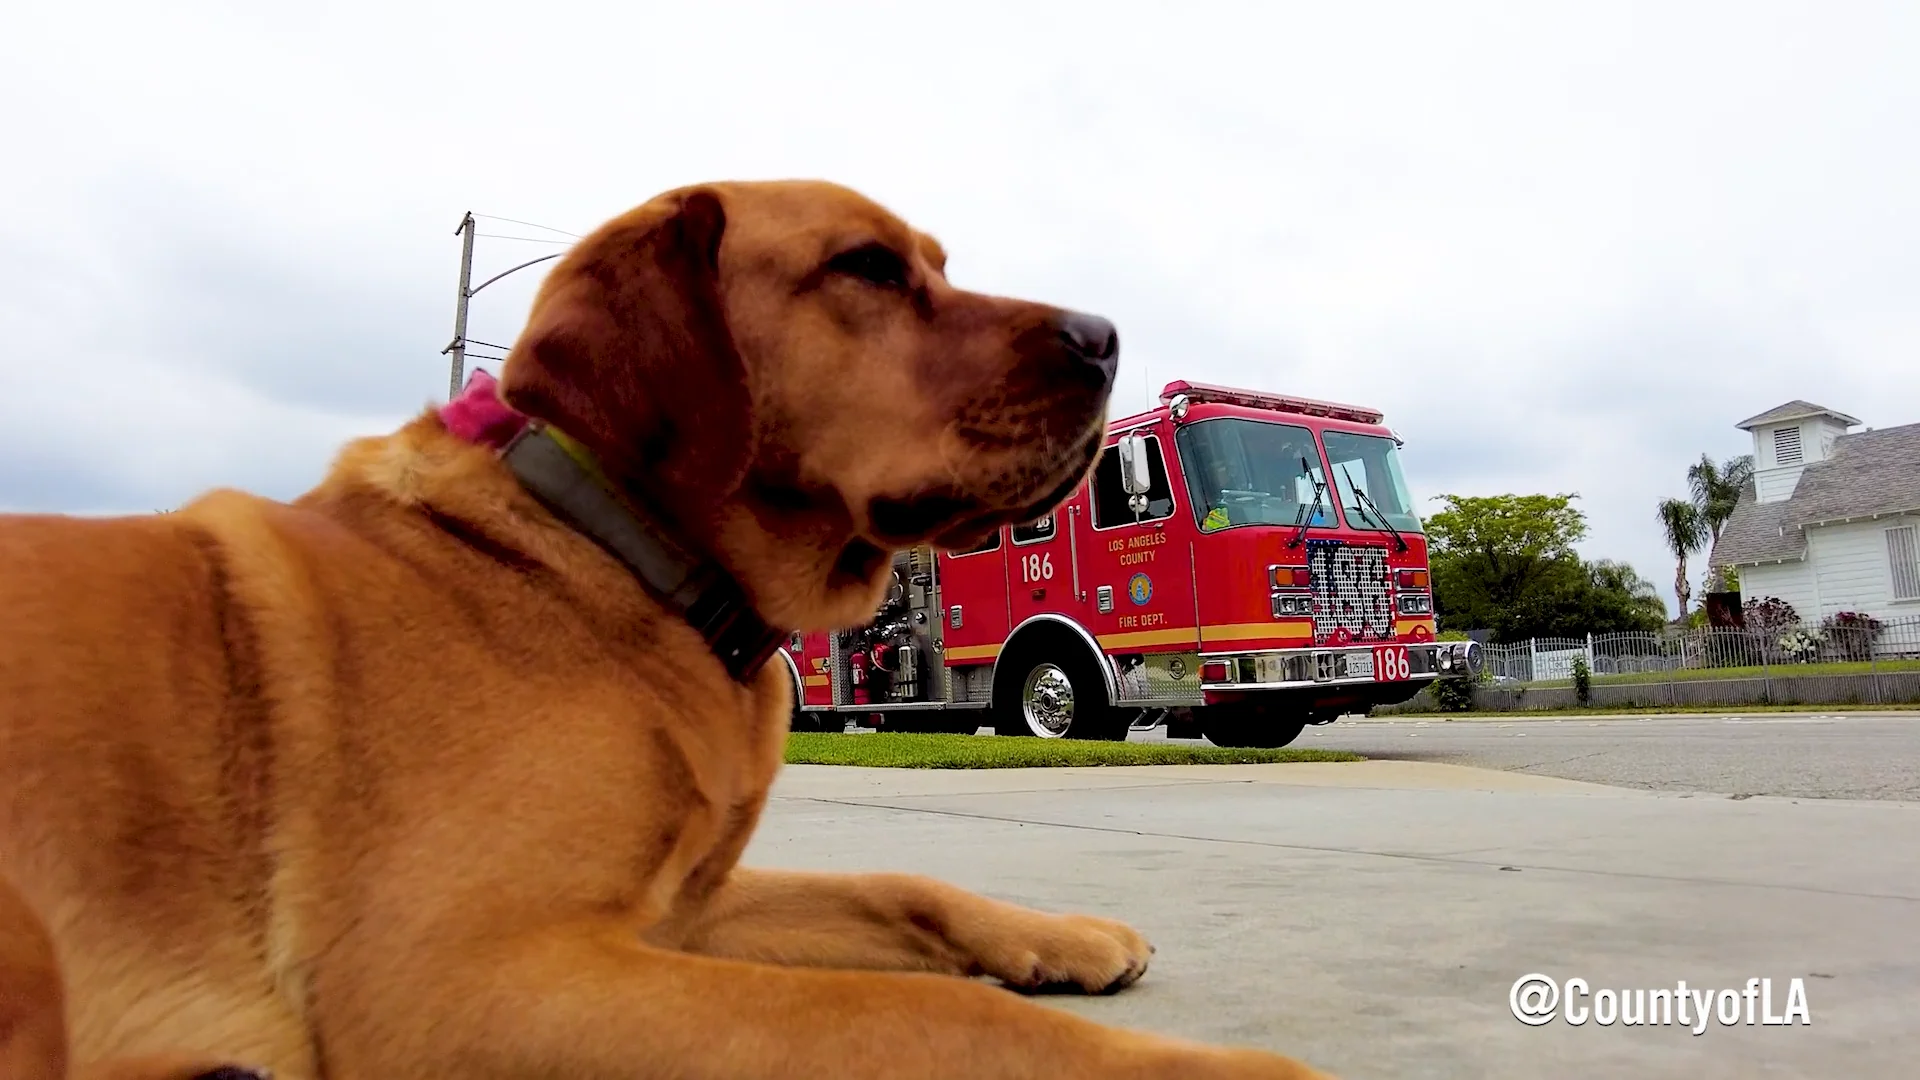 Puffs Fire Department on Vimeo